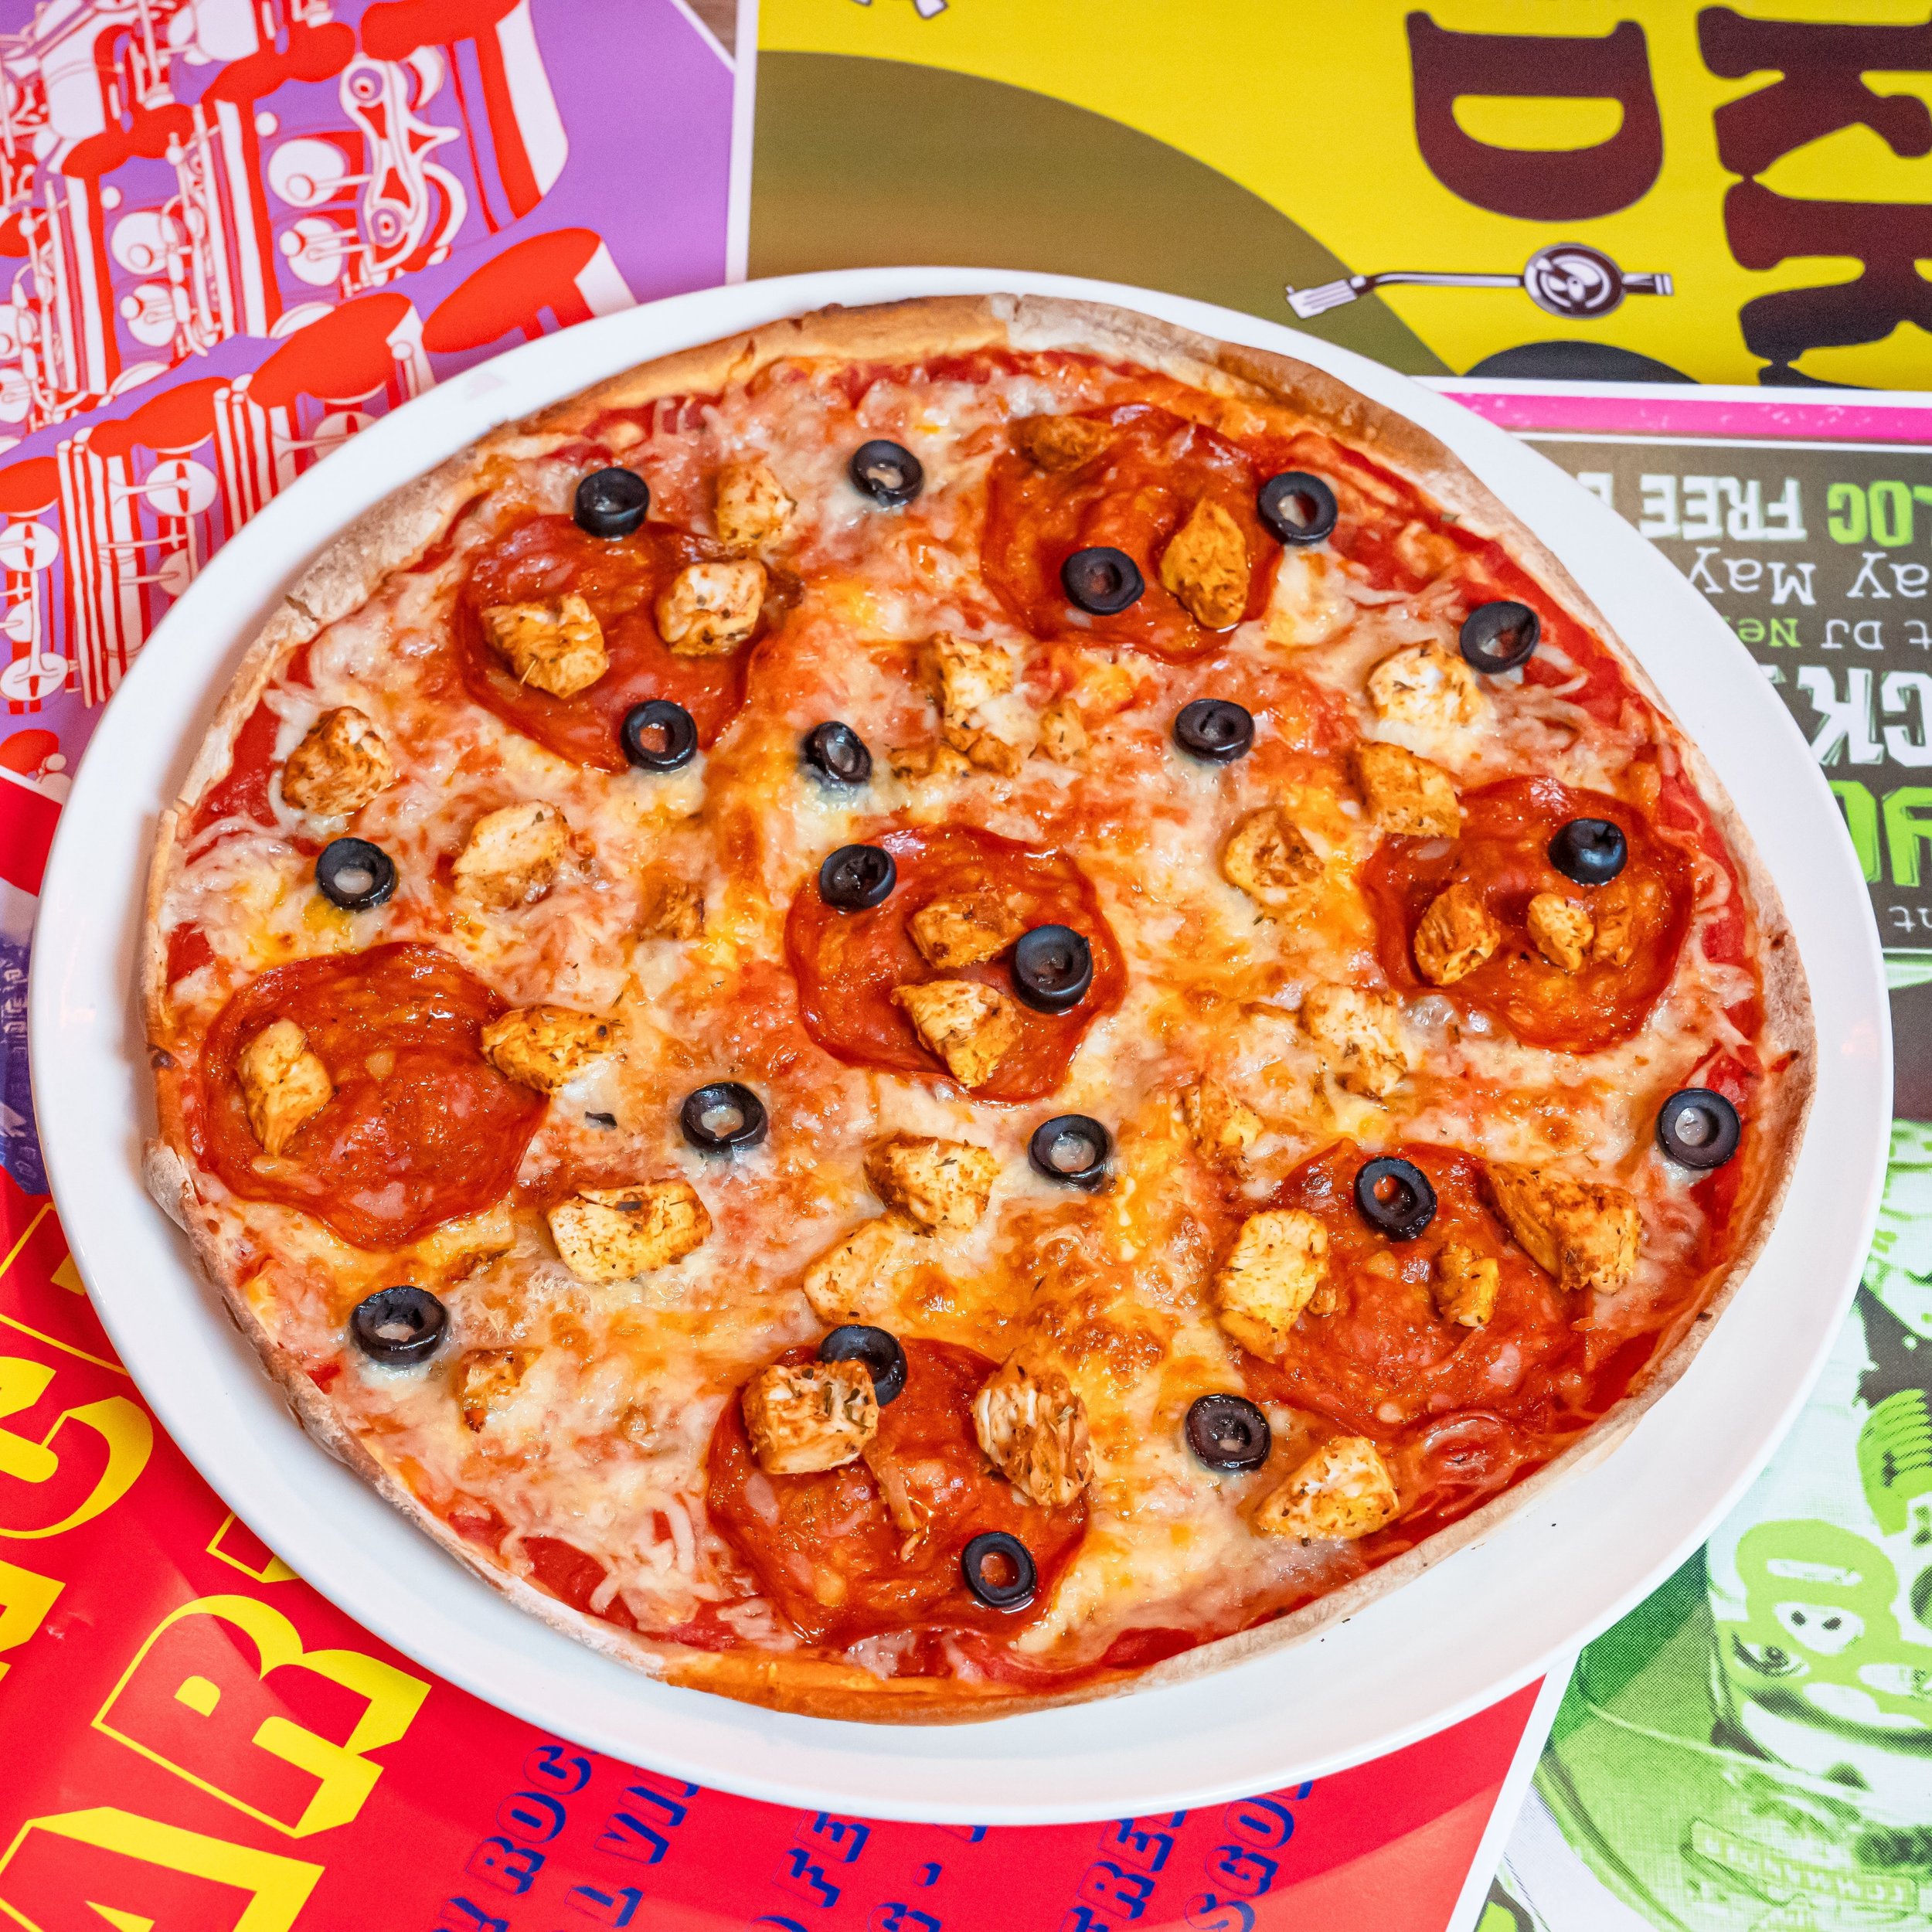 Happy SUPER SPECIAL SUNDAY! ⚡️😮&zwj;💨⚡️😮&zwj;💨⚡️ 

All of our daily deals are available for you to chomp down on while stocks last⚡️ as well as our epic pizza deal and late night pizza til 3am 🍕🍕 #blocglasgow